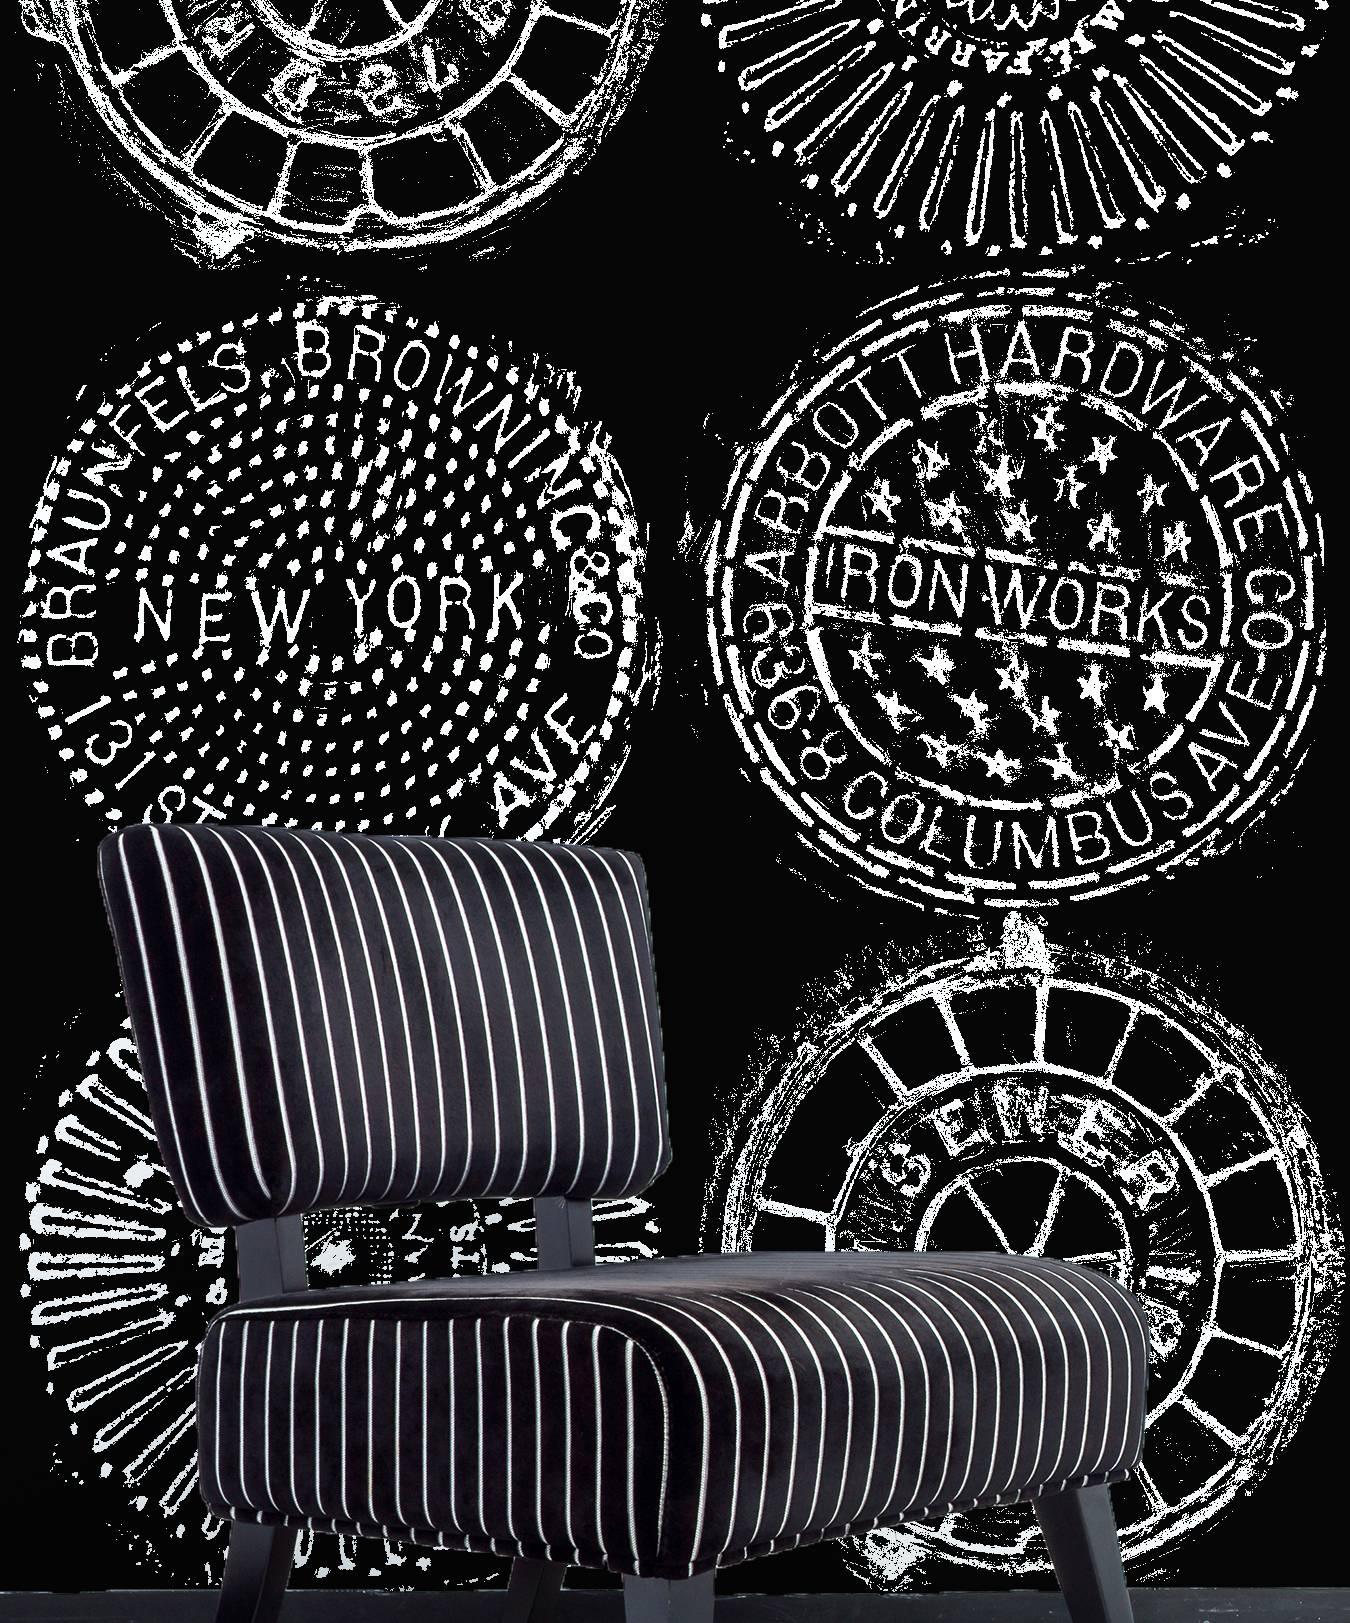 Paper NYC Manhole Printed Wallpaper, White on Charcoal Manhole cover For Sale